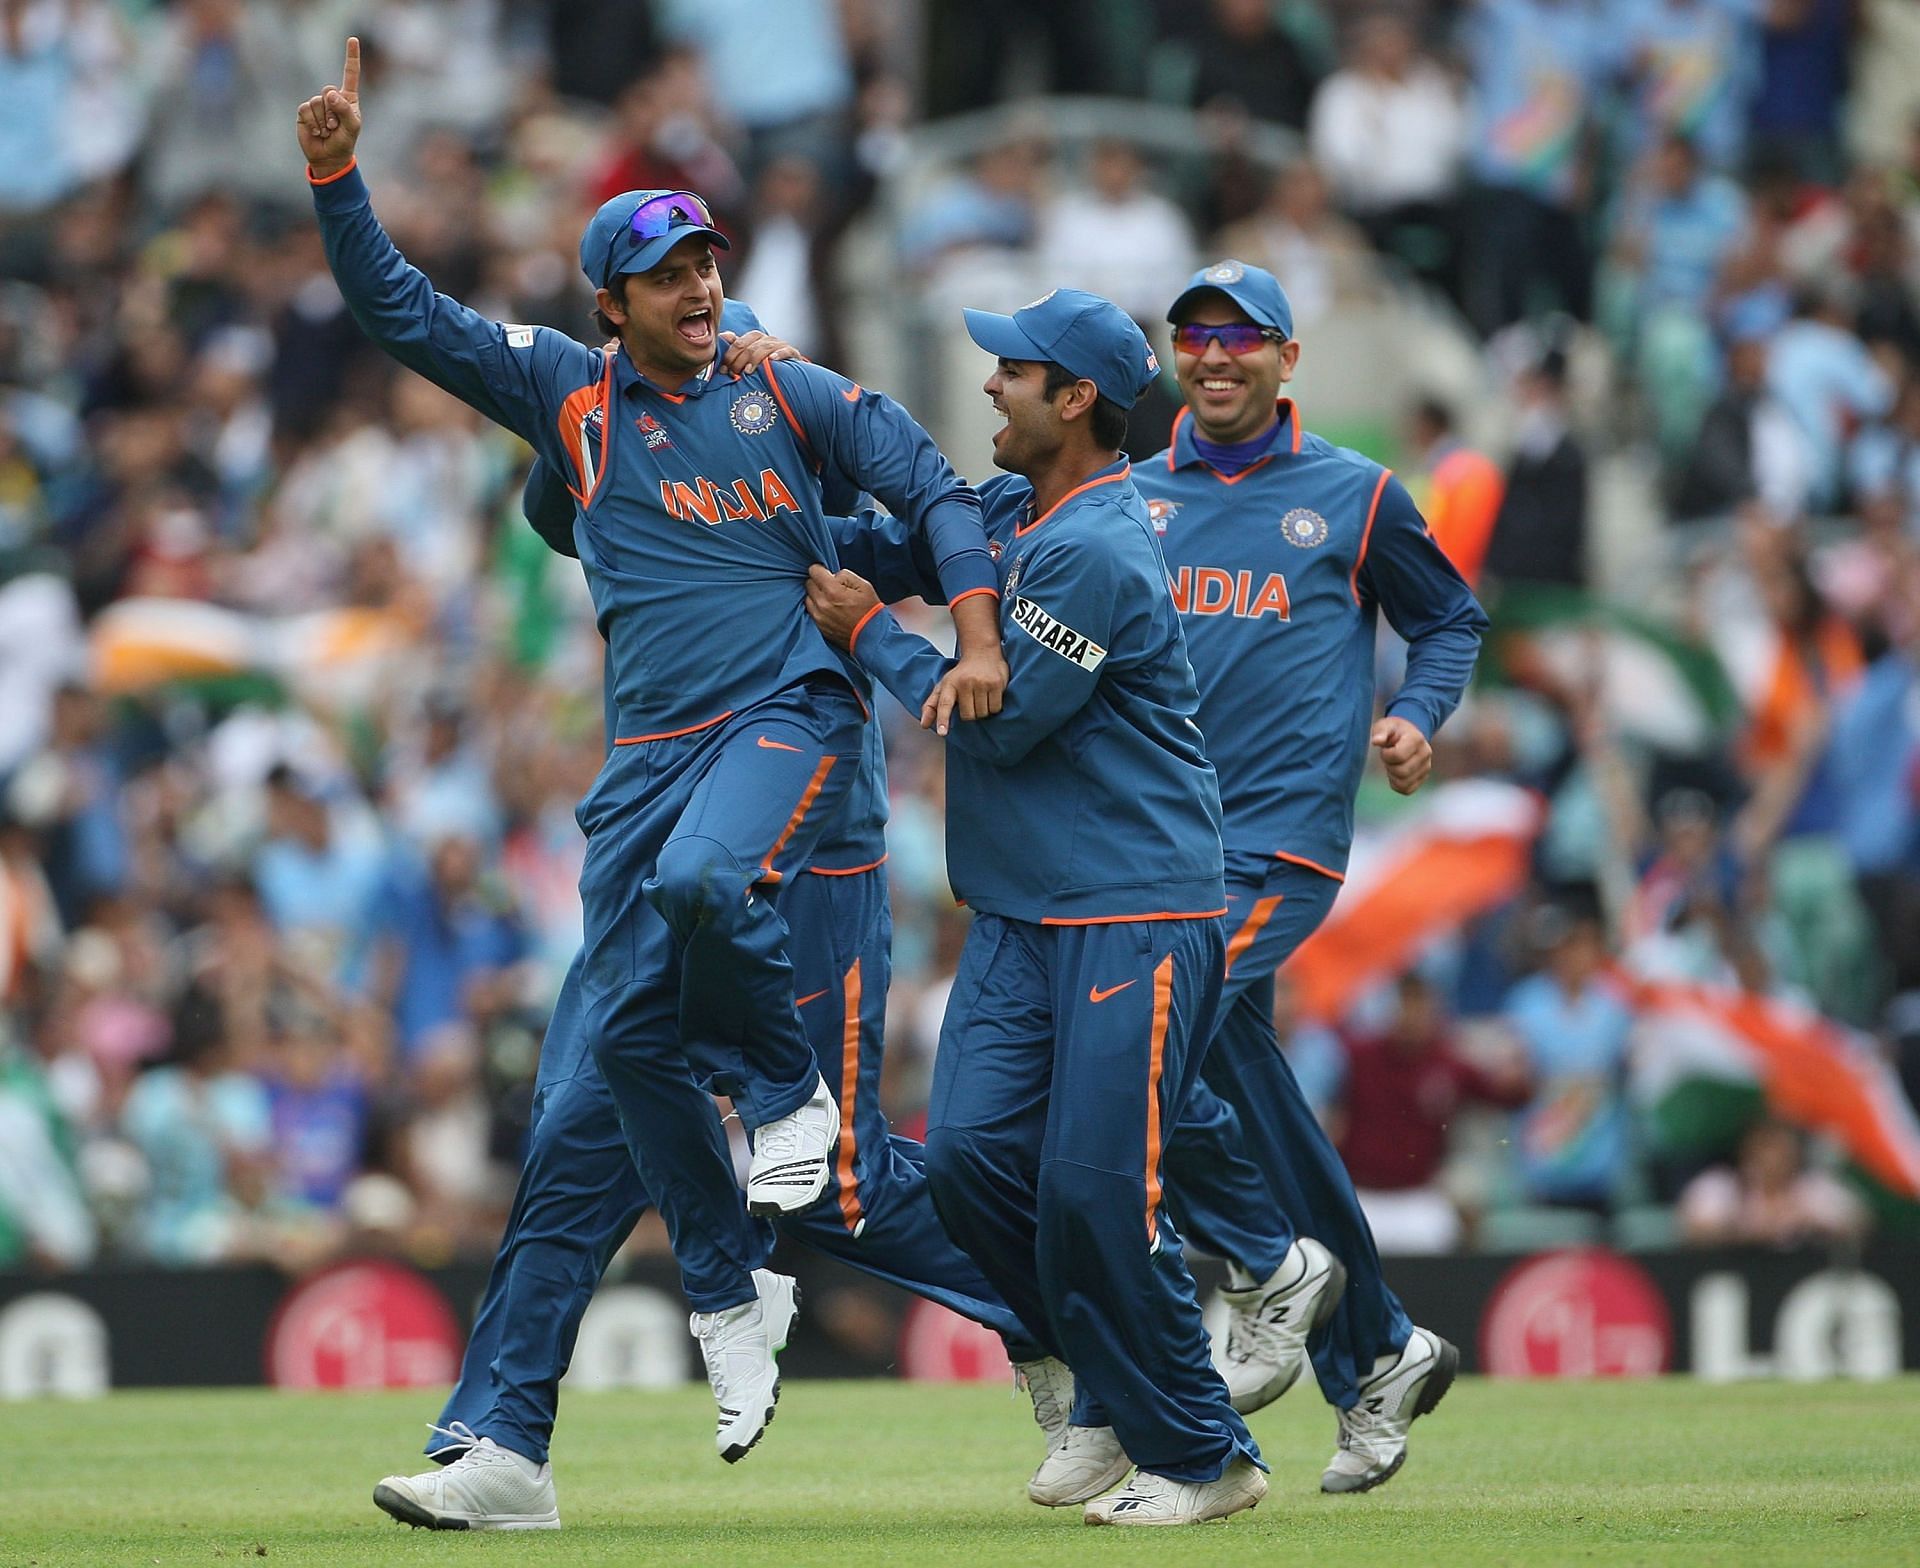 Suresh Raina celebrating a run-out with his teammates [Getty Images]